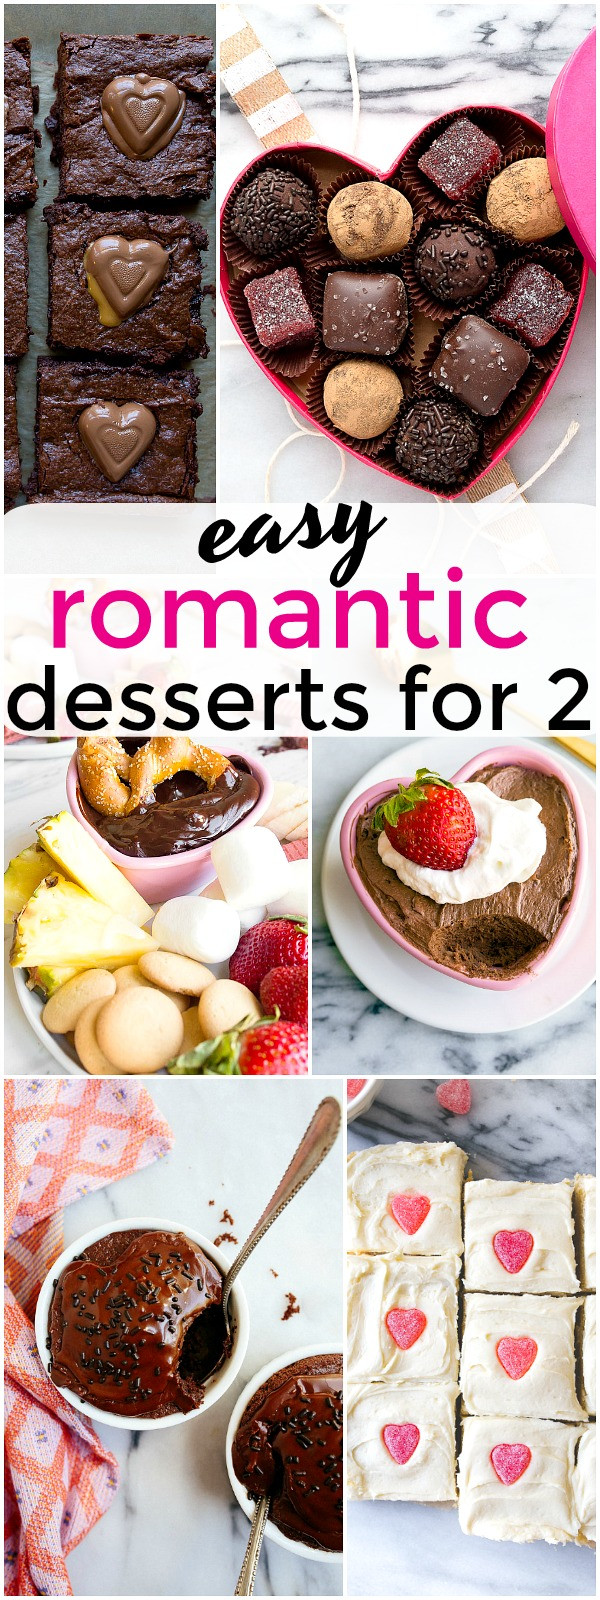 Desserts Recipes For Two
 Easy Romantic Desserts for Two People on Valentine s Day